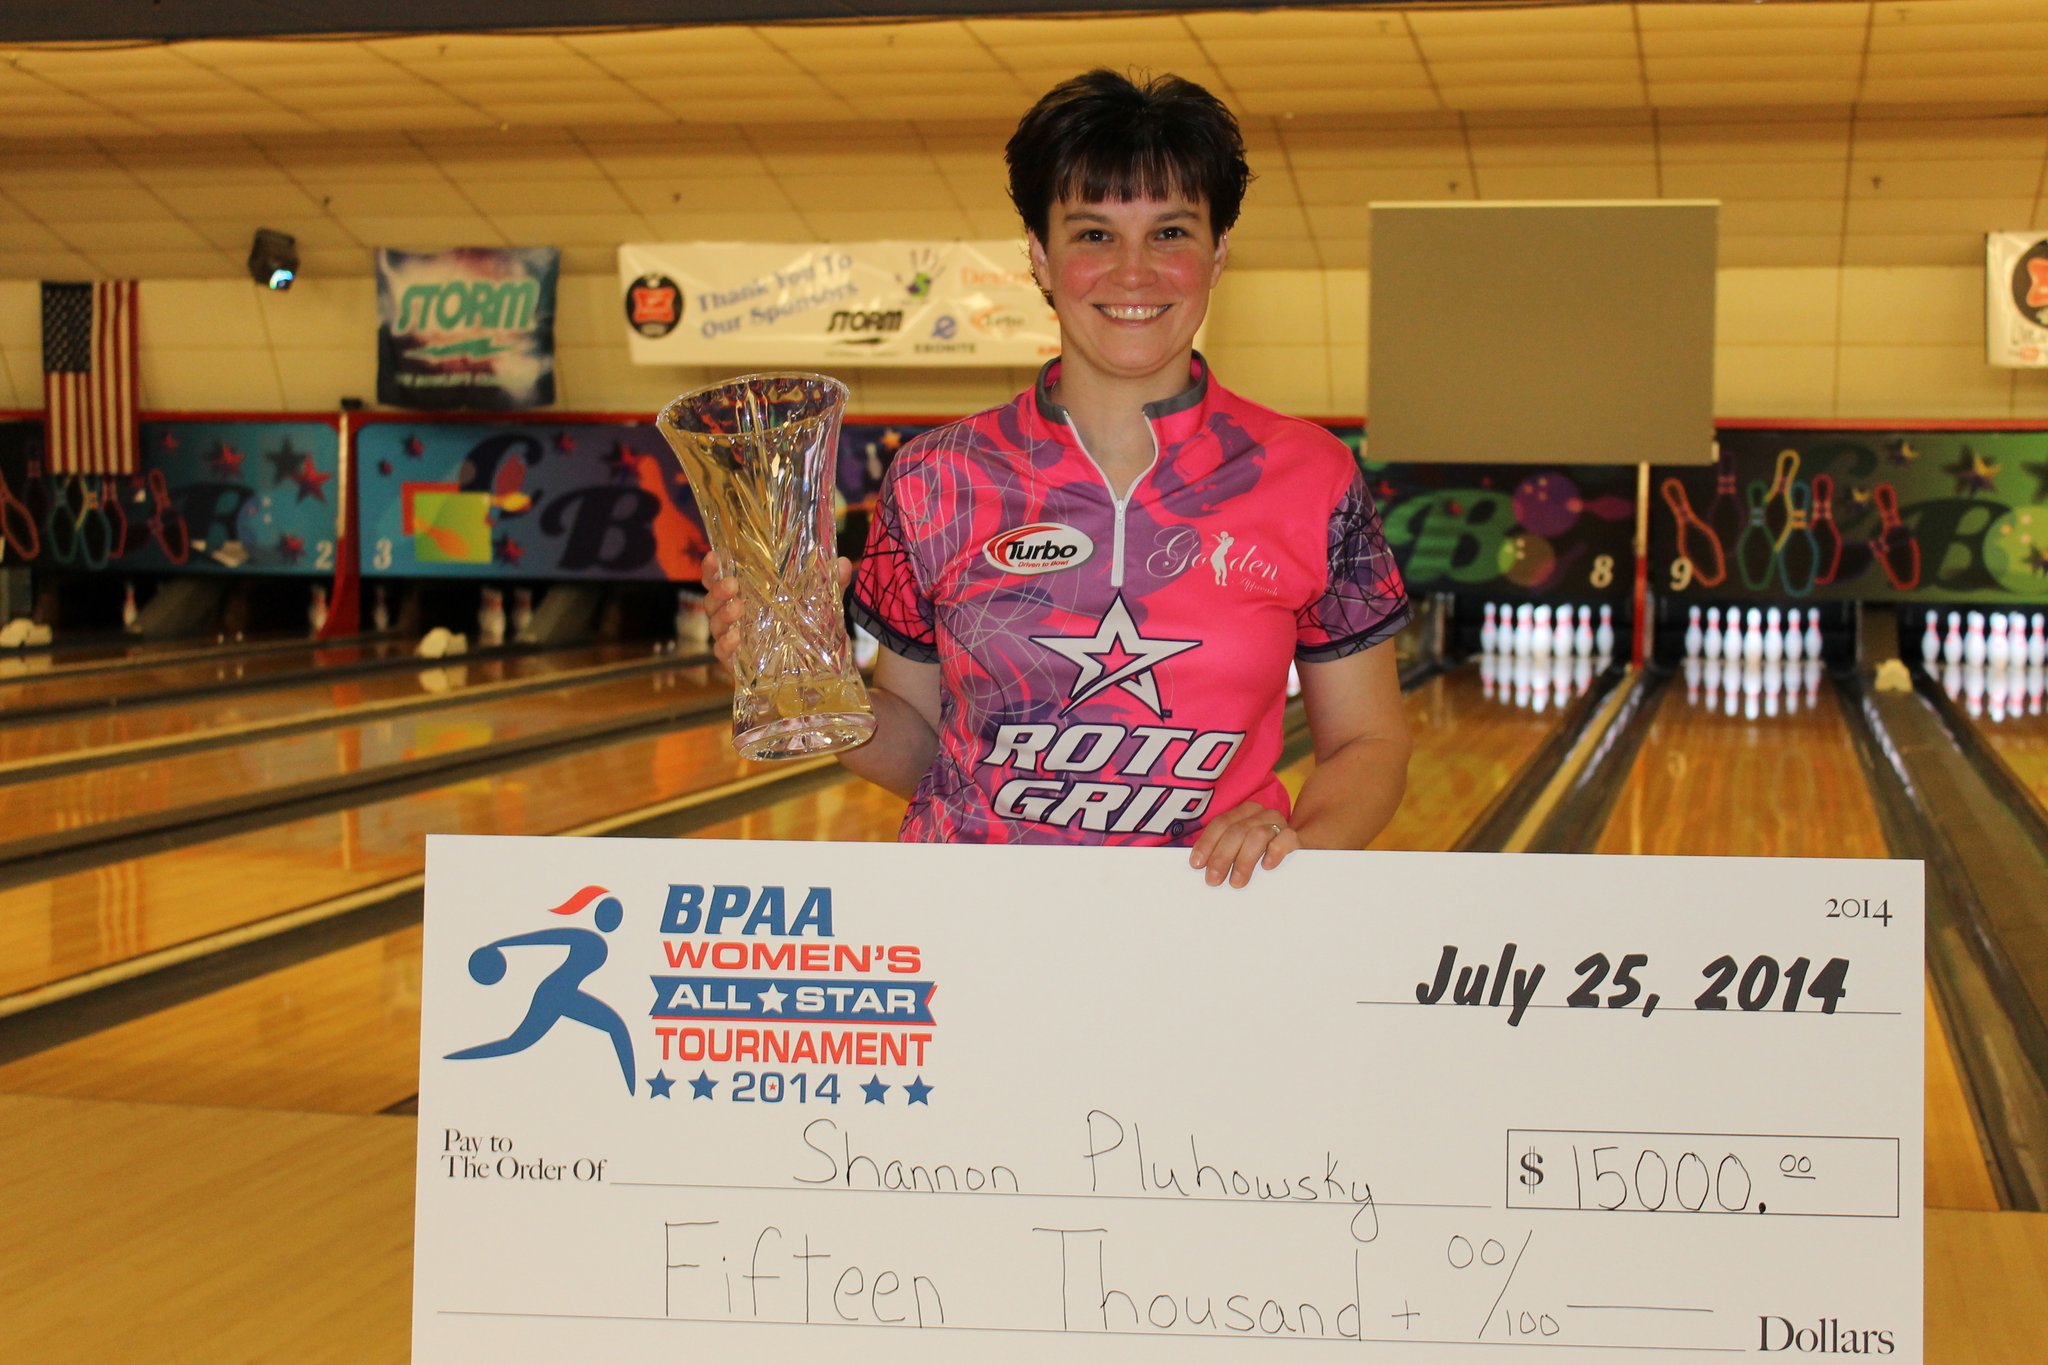 Shannon Pluhowsky On The New Roto Grip Releases & The PWBA